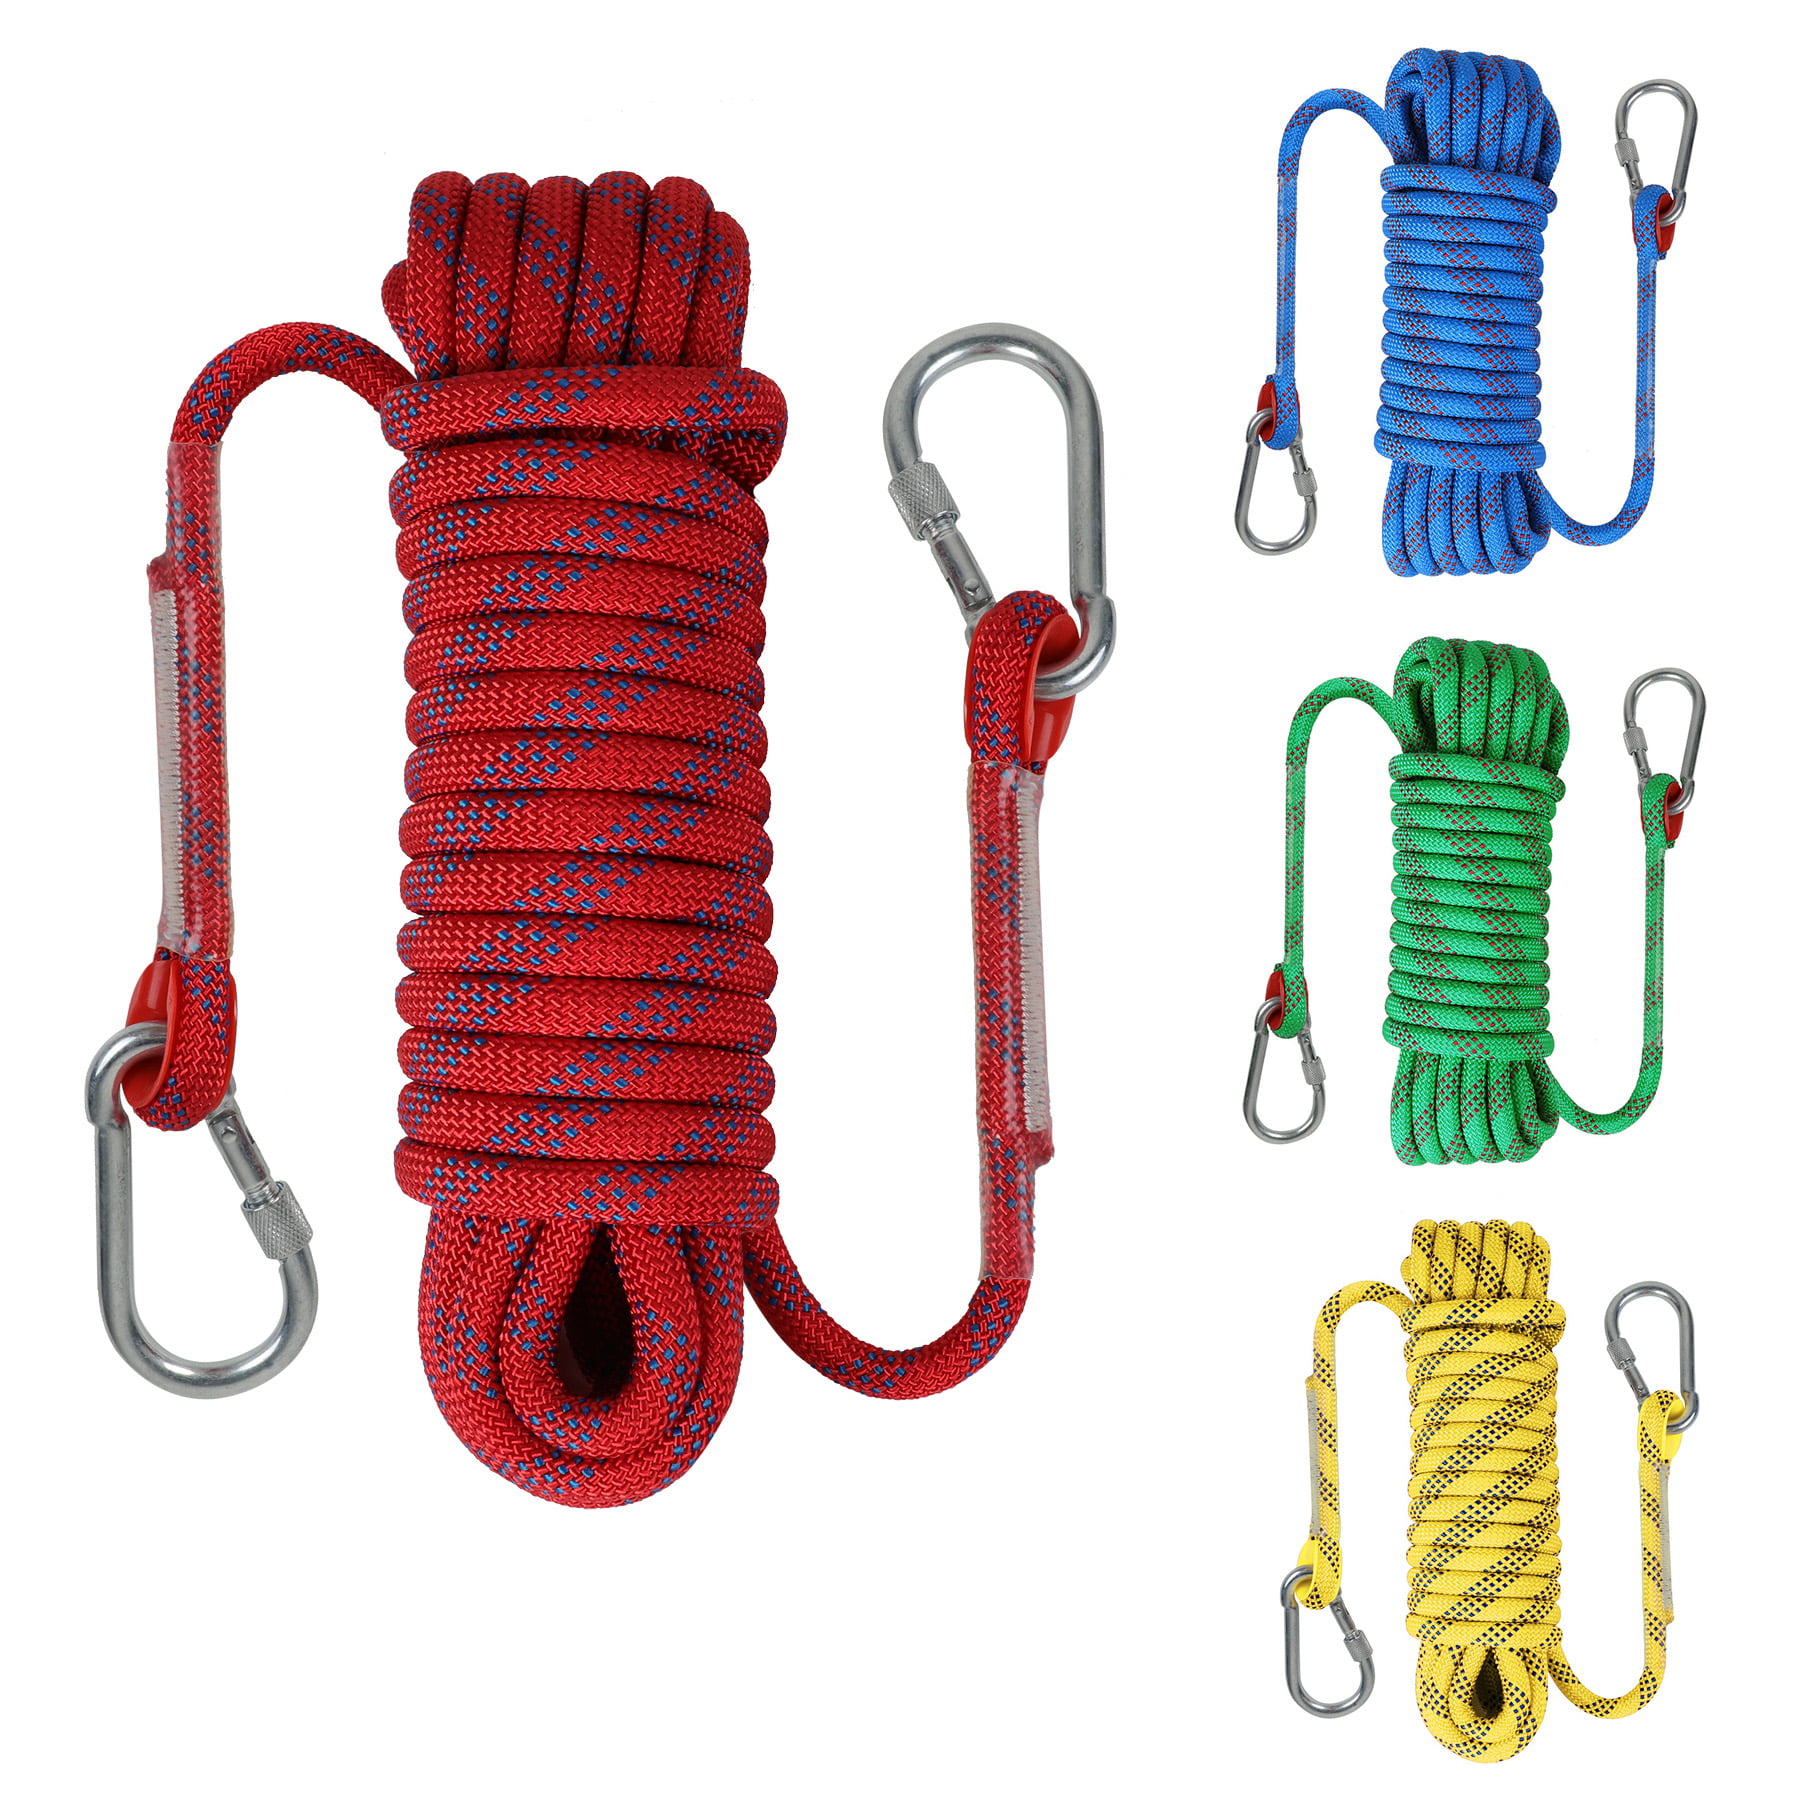 Climbing Rope High Strength Rappelling Abseiling Accessory Rope Cord With Carabiner for Fire Rescue Hiking mountaineering 